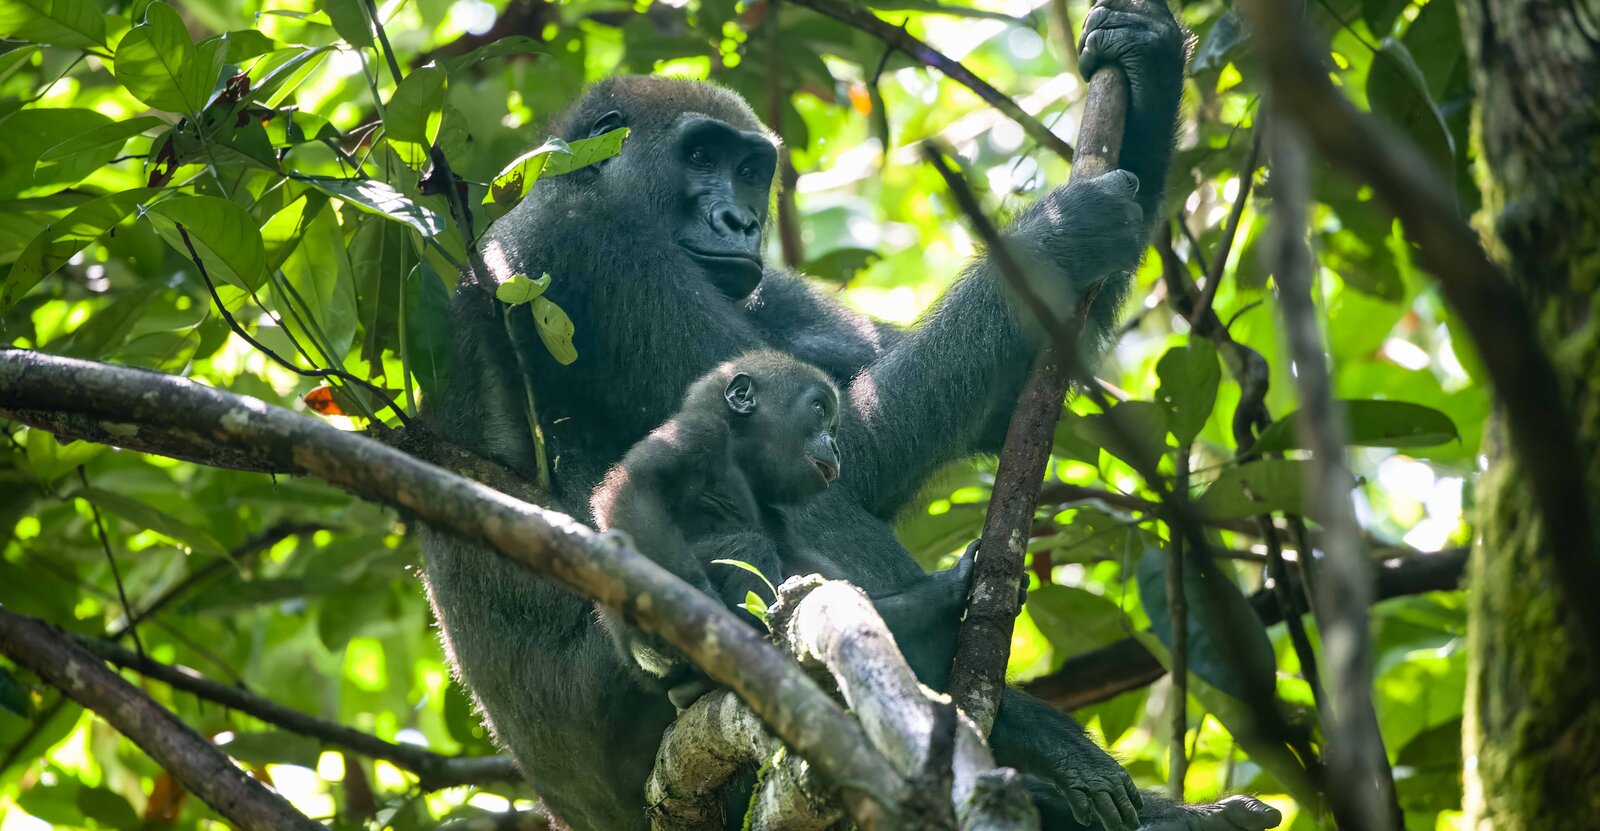 A photo of an adult gorilla and baby high in the branches of a leafy green tree.